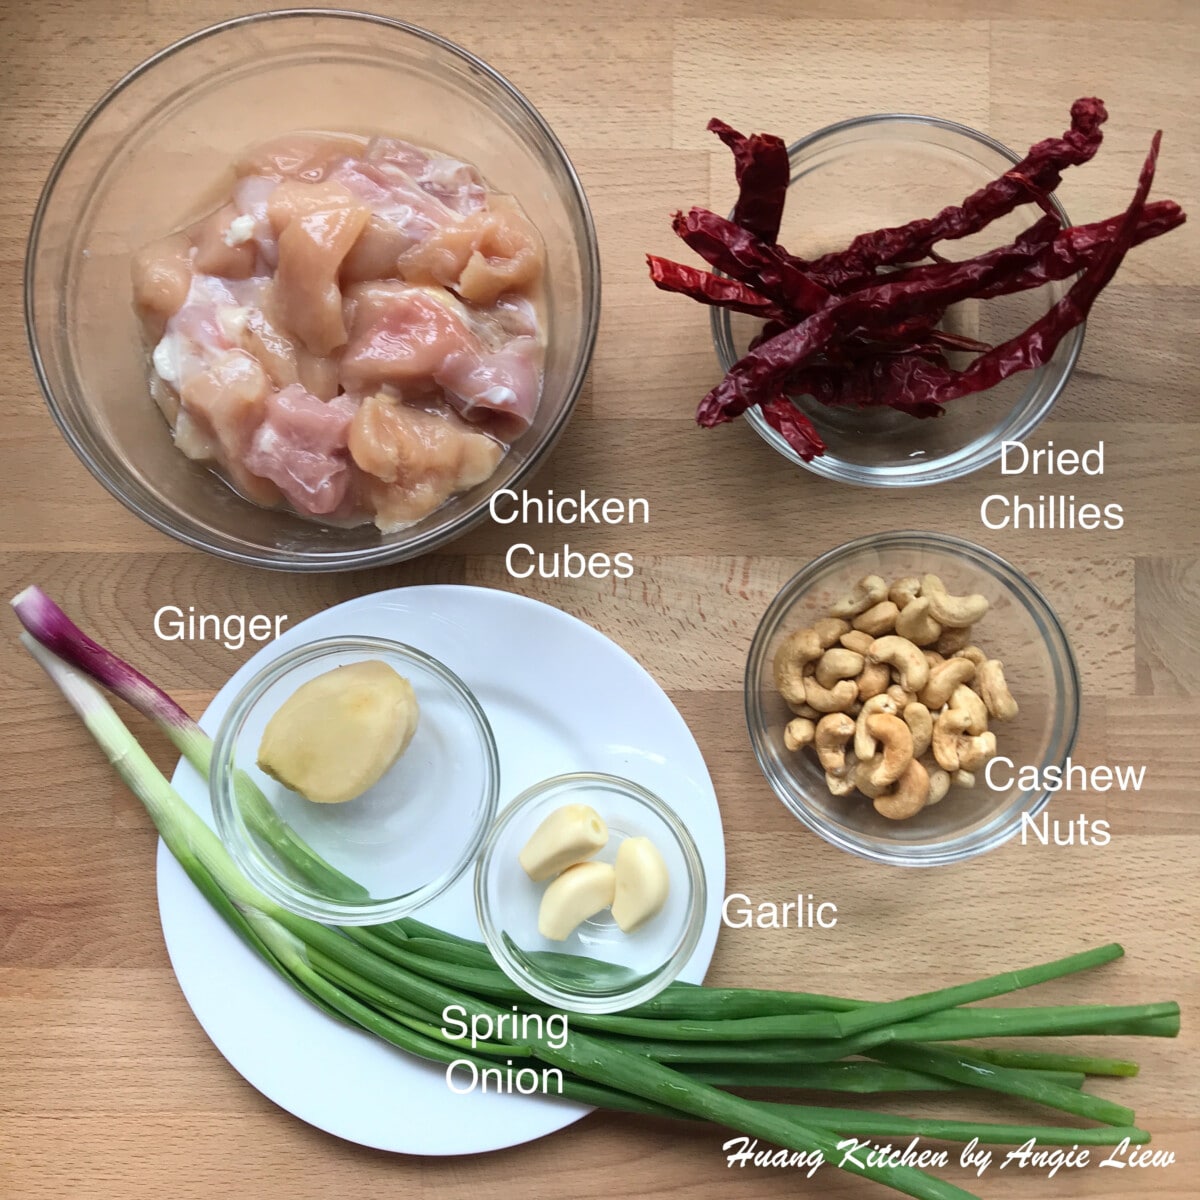 Prepare ingredients for Kung Pao Chicken